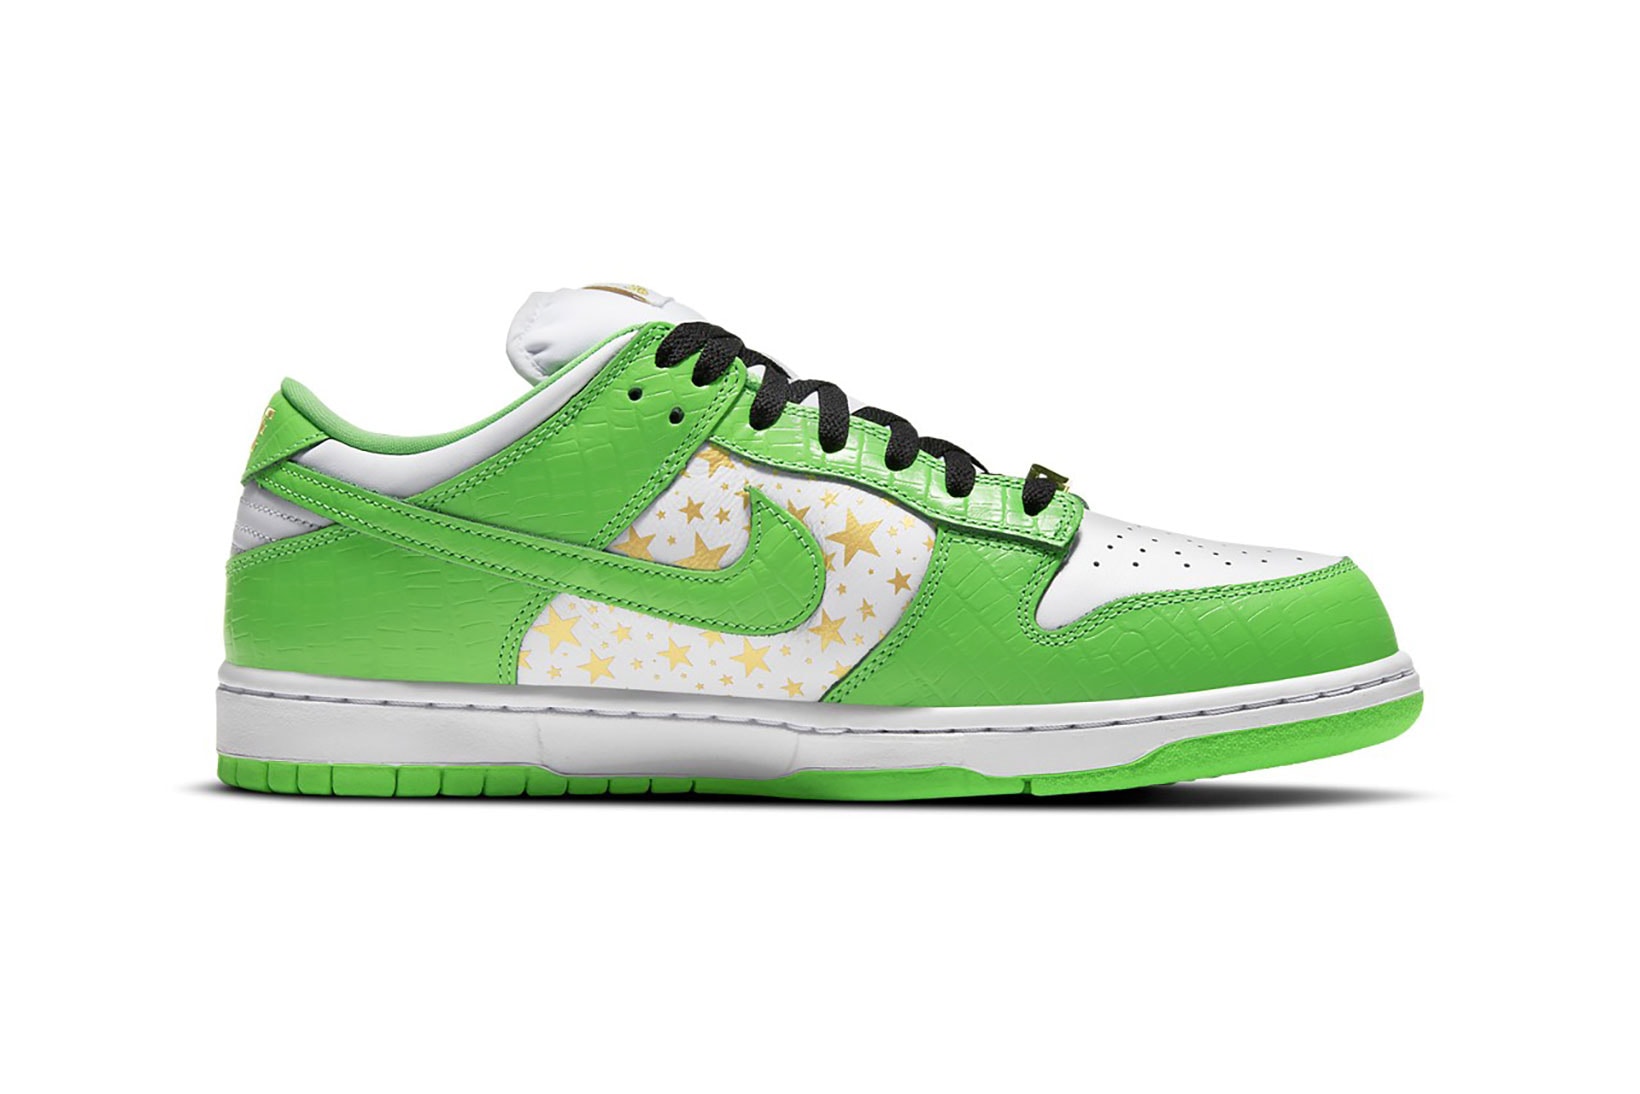 supreme nike sb dunk low collaboration sneakers mean green white black stars colorway sneakerhead shoes footwear lateral